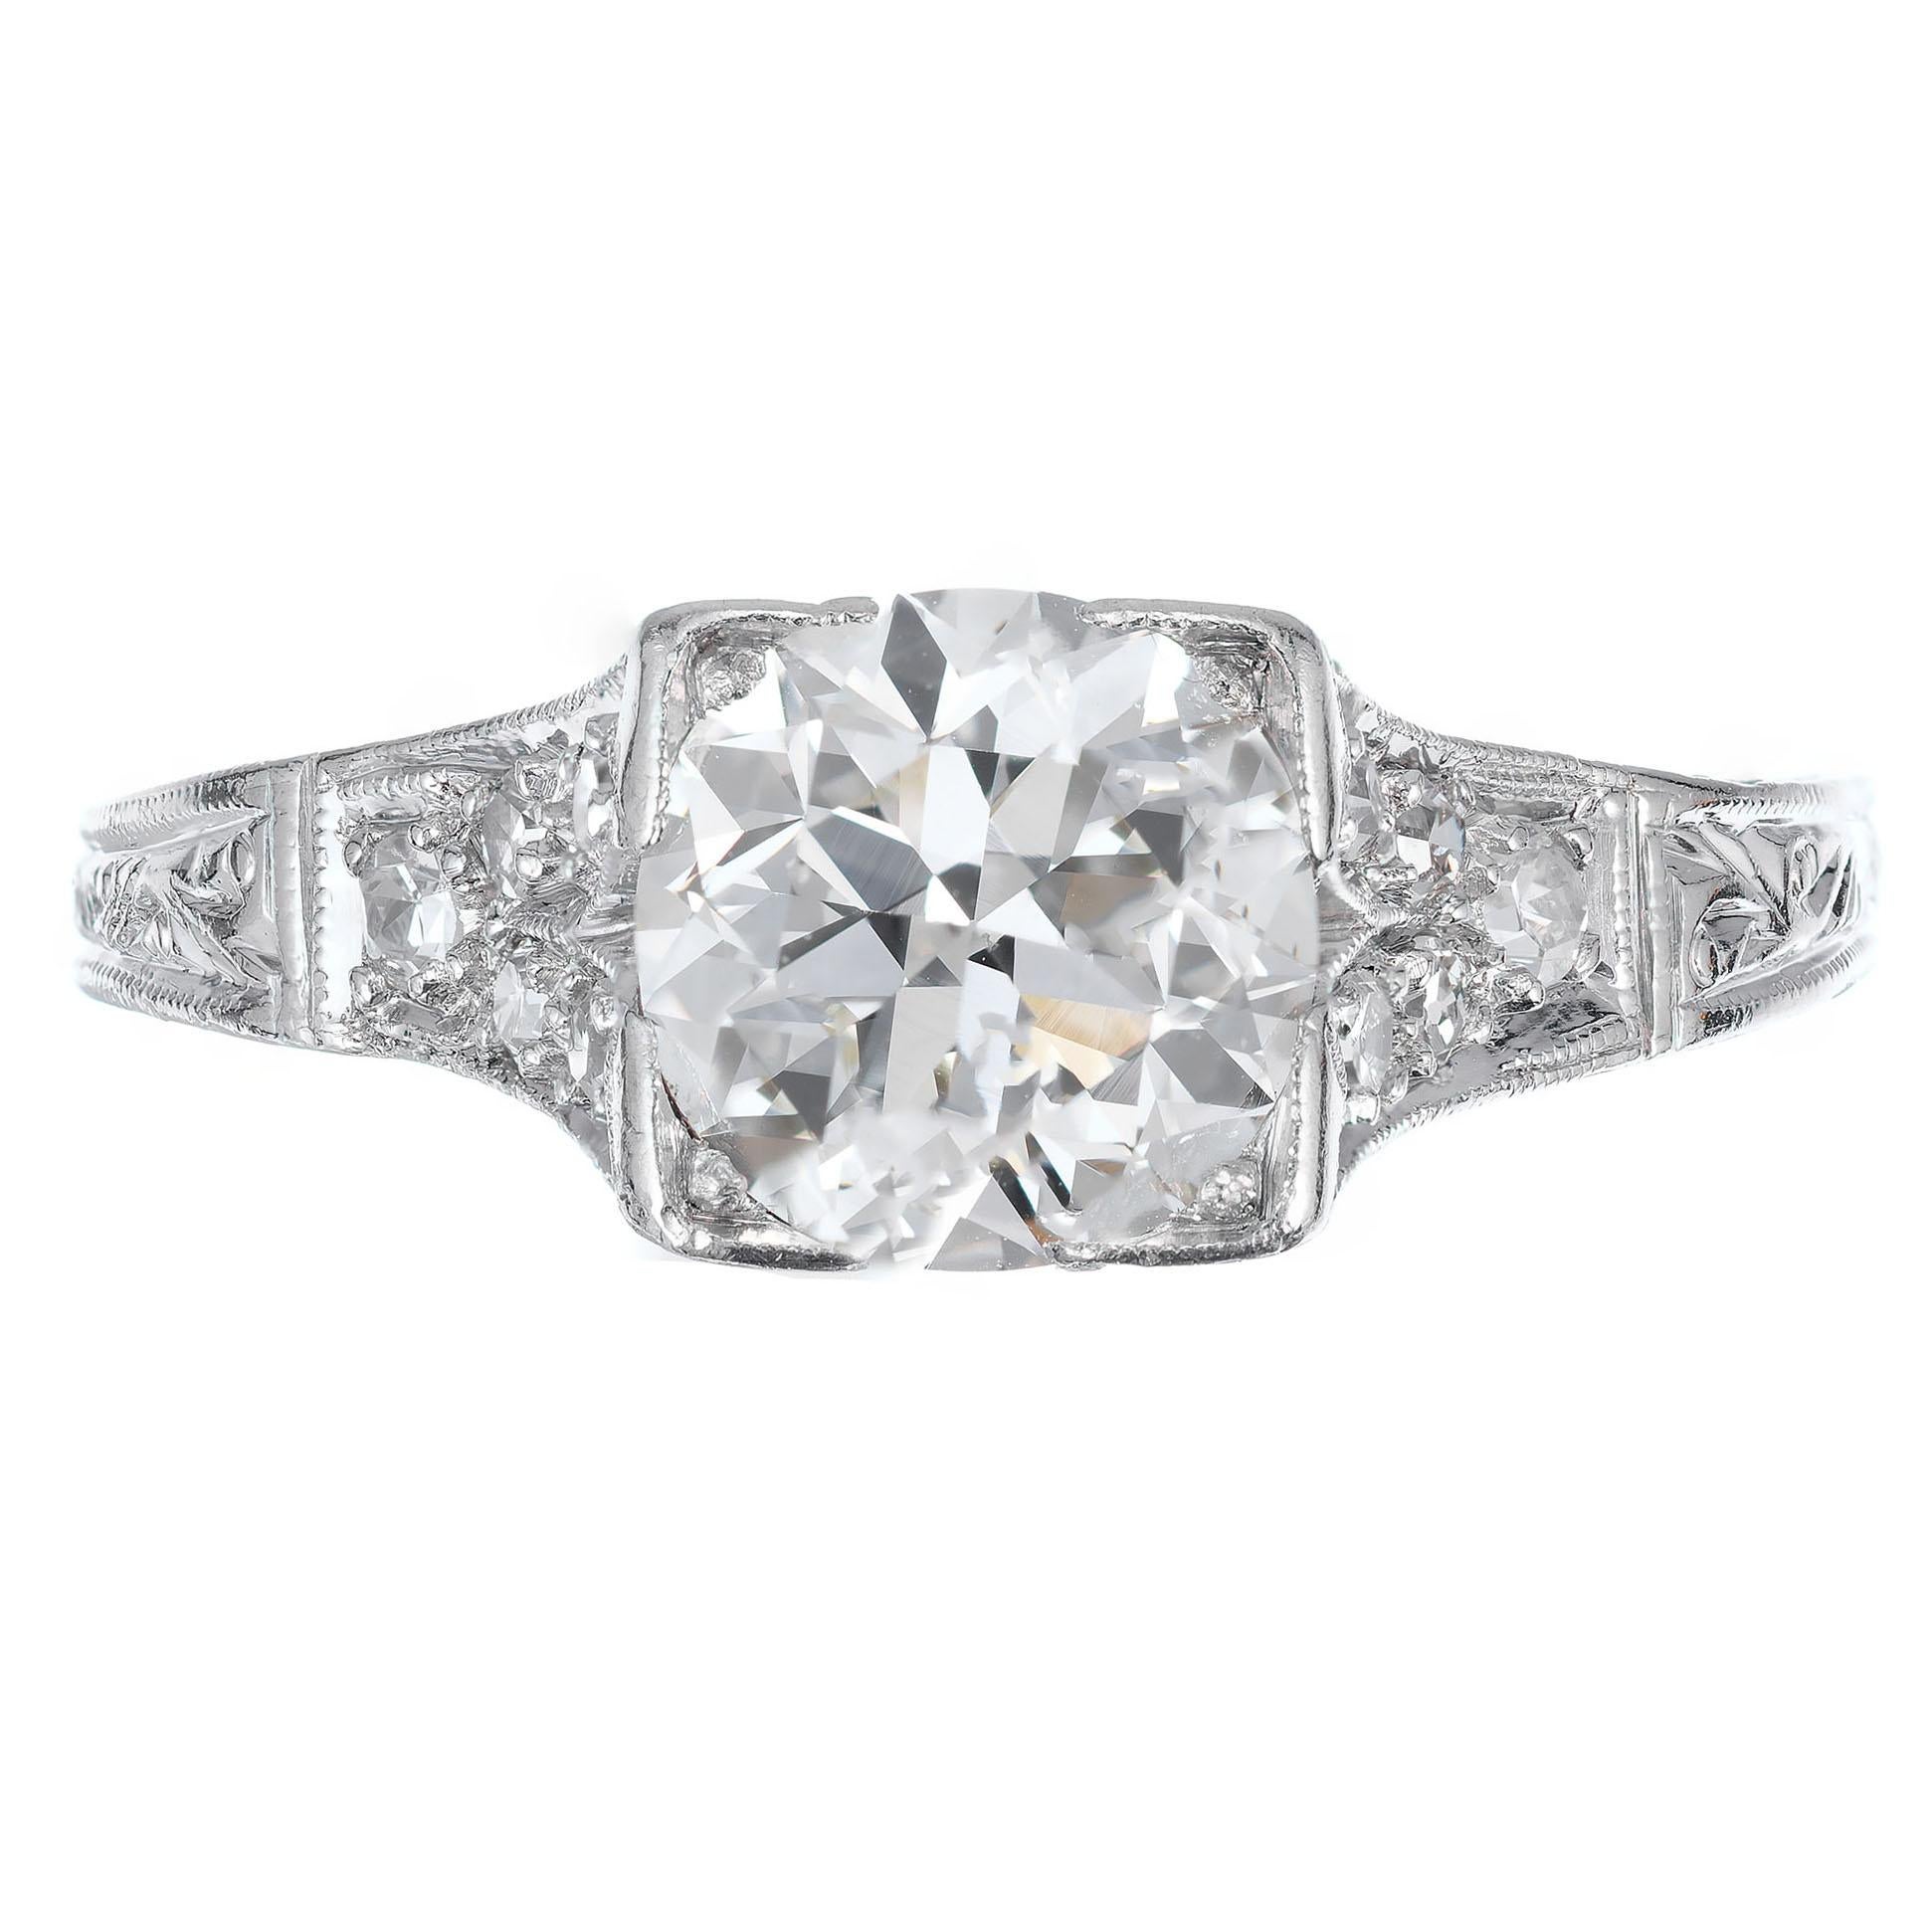 1930's Art Deco diamond engagement ring. EGL certified round brilliant cut diamond center stone. Hand pierced and hand engraved platinum setting with 10 Pave set single cut  accent diamonds. 

1 round diamond approx. total weight, 1.34cts, SI1, H-I.